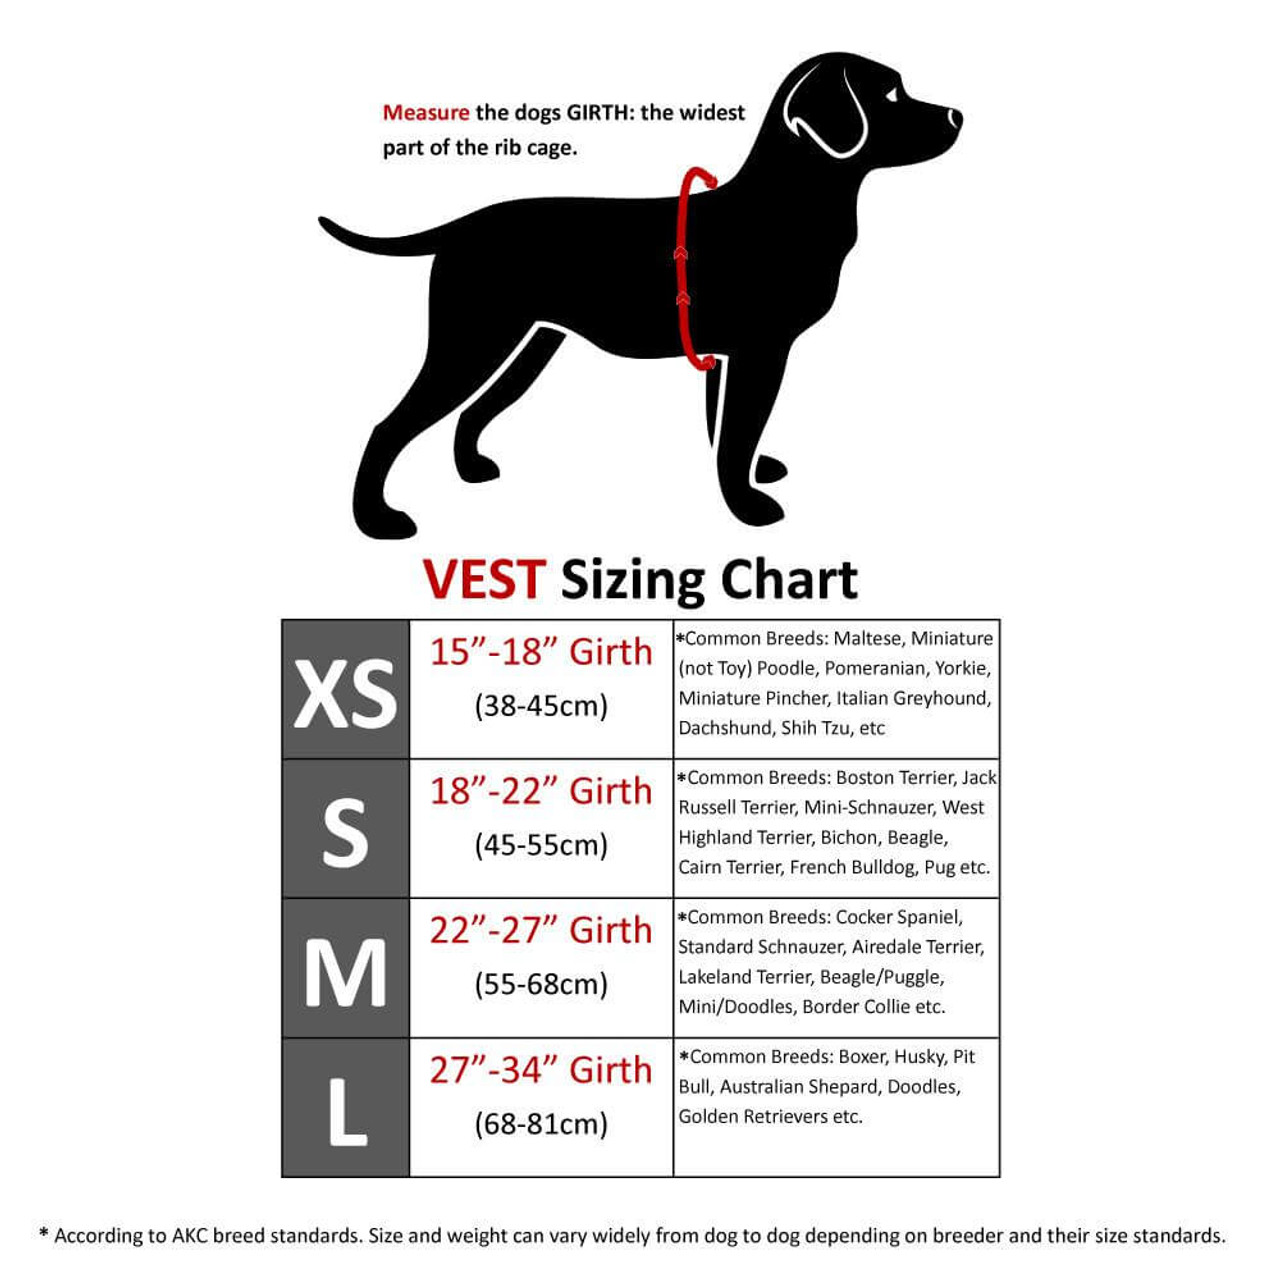 https://cdn11.bigcommerce.com/s-9usi8/images/stencil/1280x1280/products/11246/17144/cooling-vest-size-chart__95935.1621955441.jpg?c=2?imbypass=on